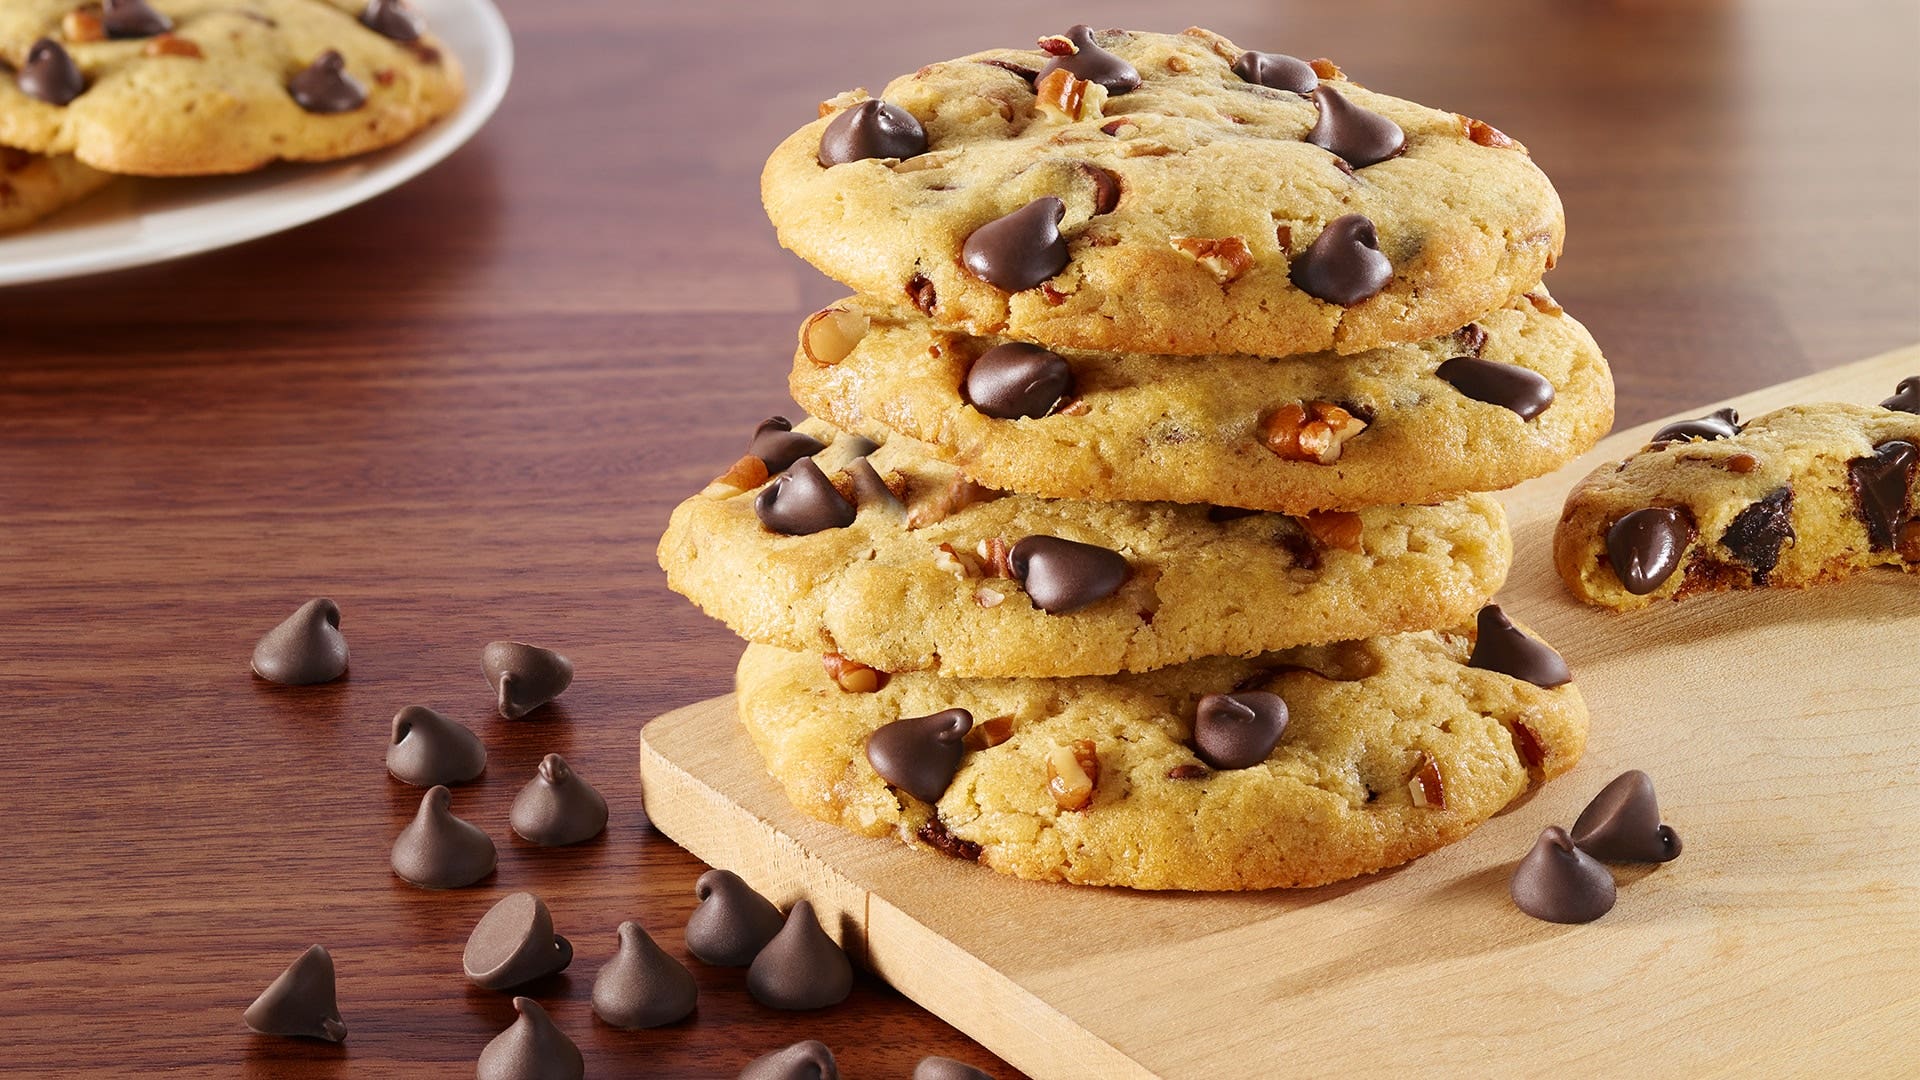 Chocolate Chip Cookies with Sugar-Free Chocolate Chips